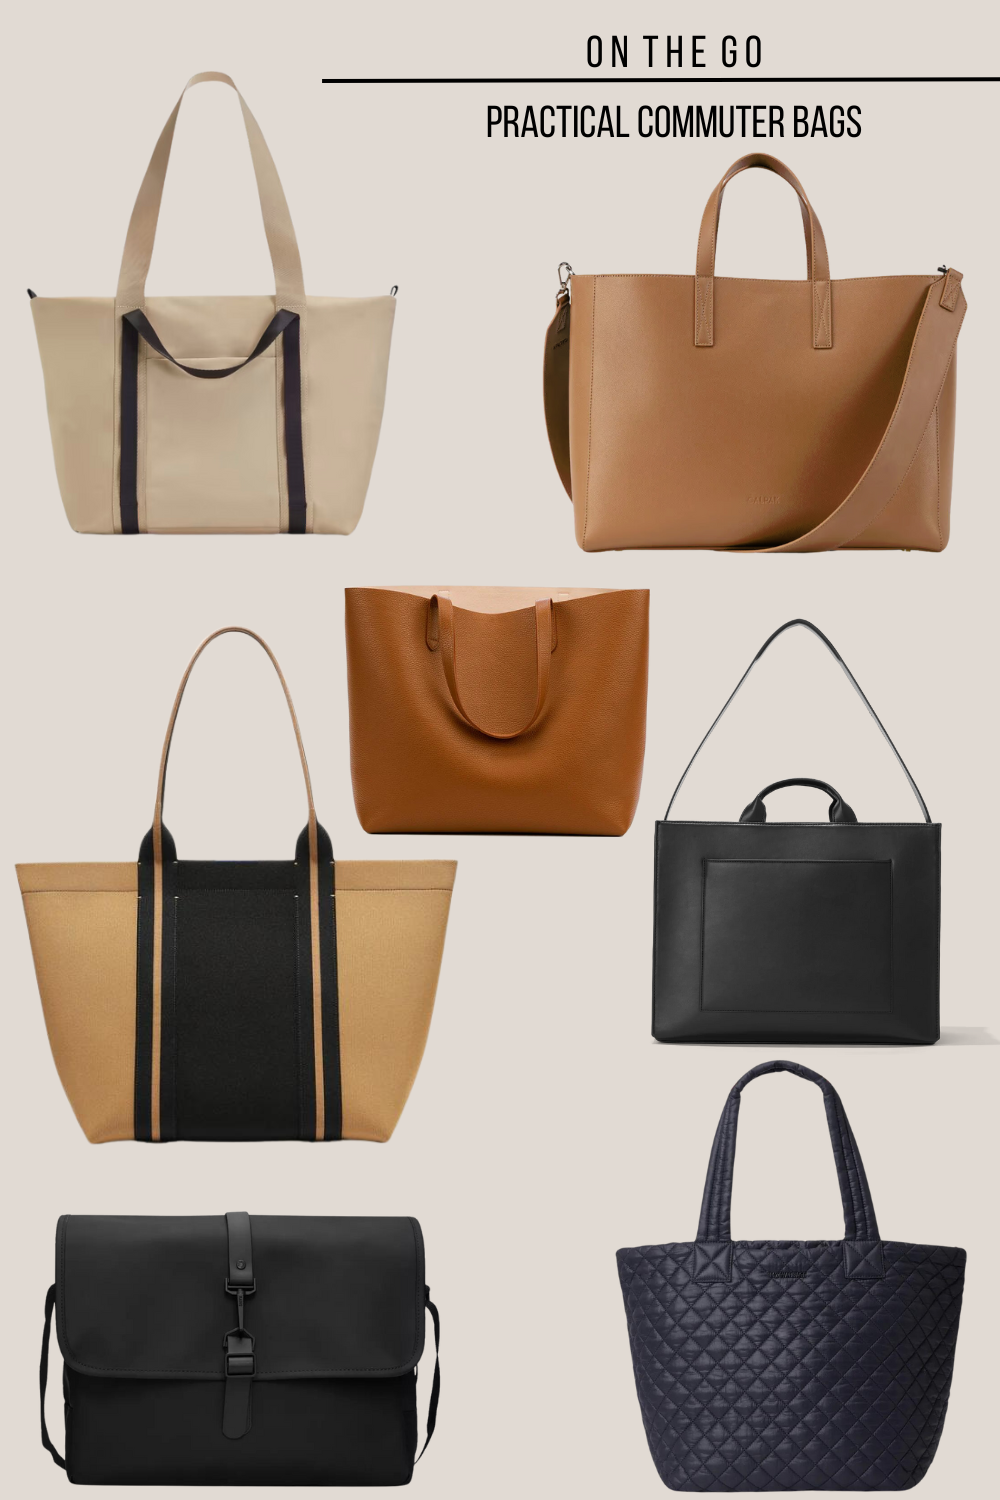 Practical-commuter-bags-for-women-on-the-go